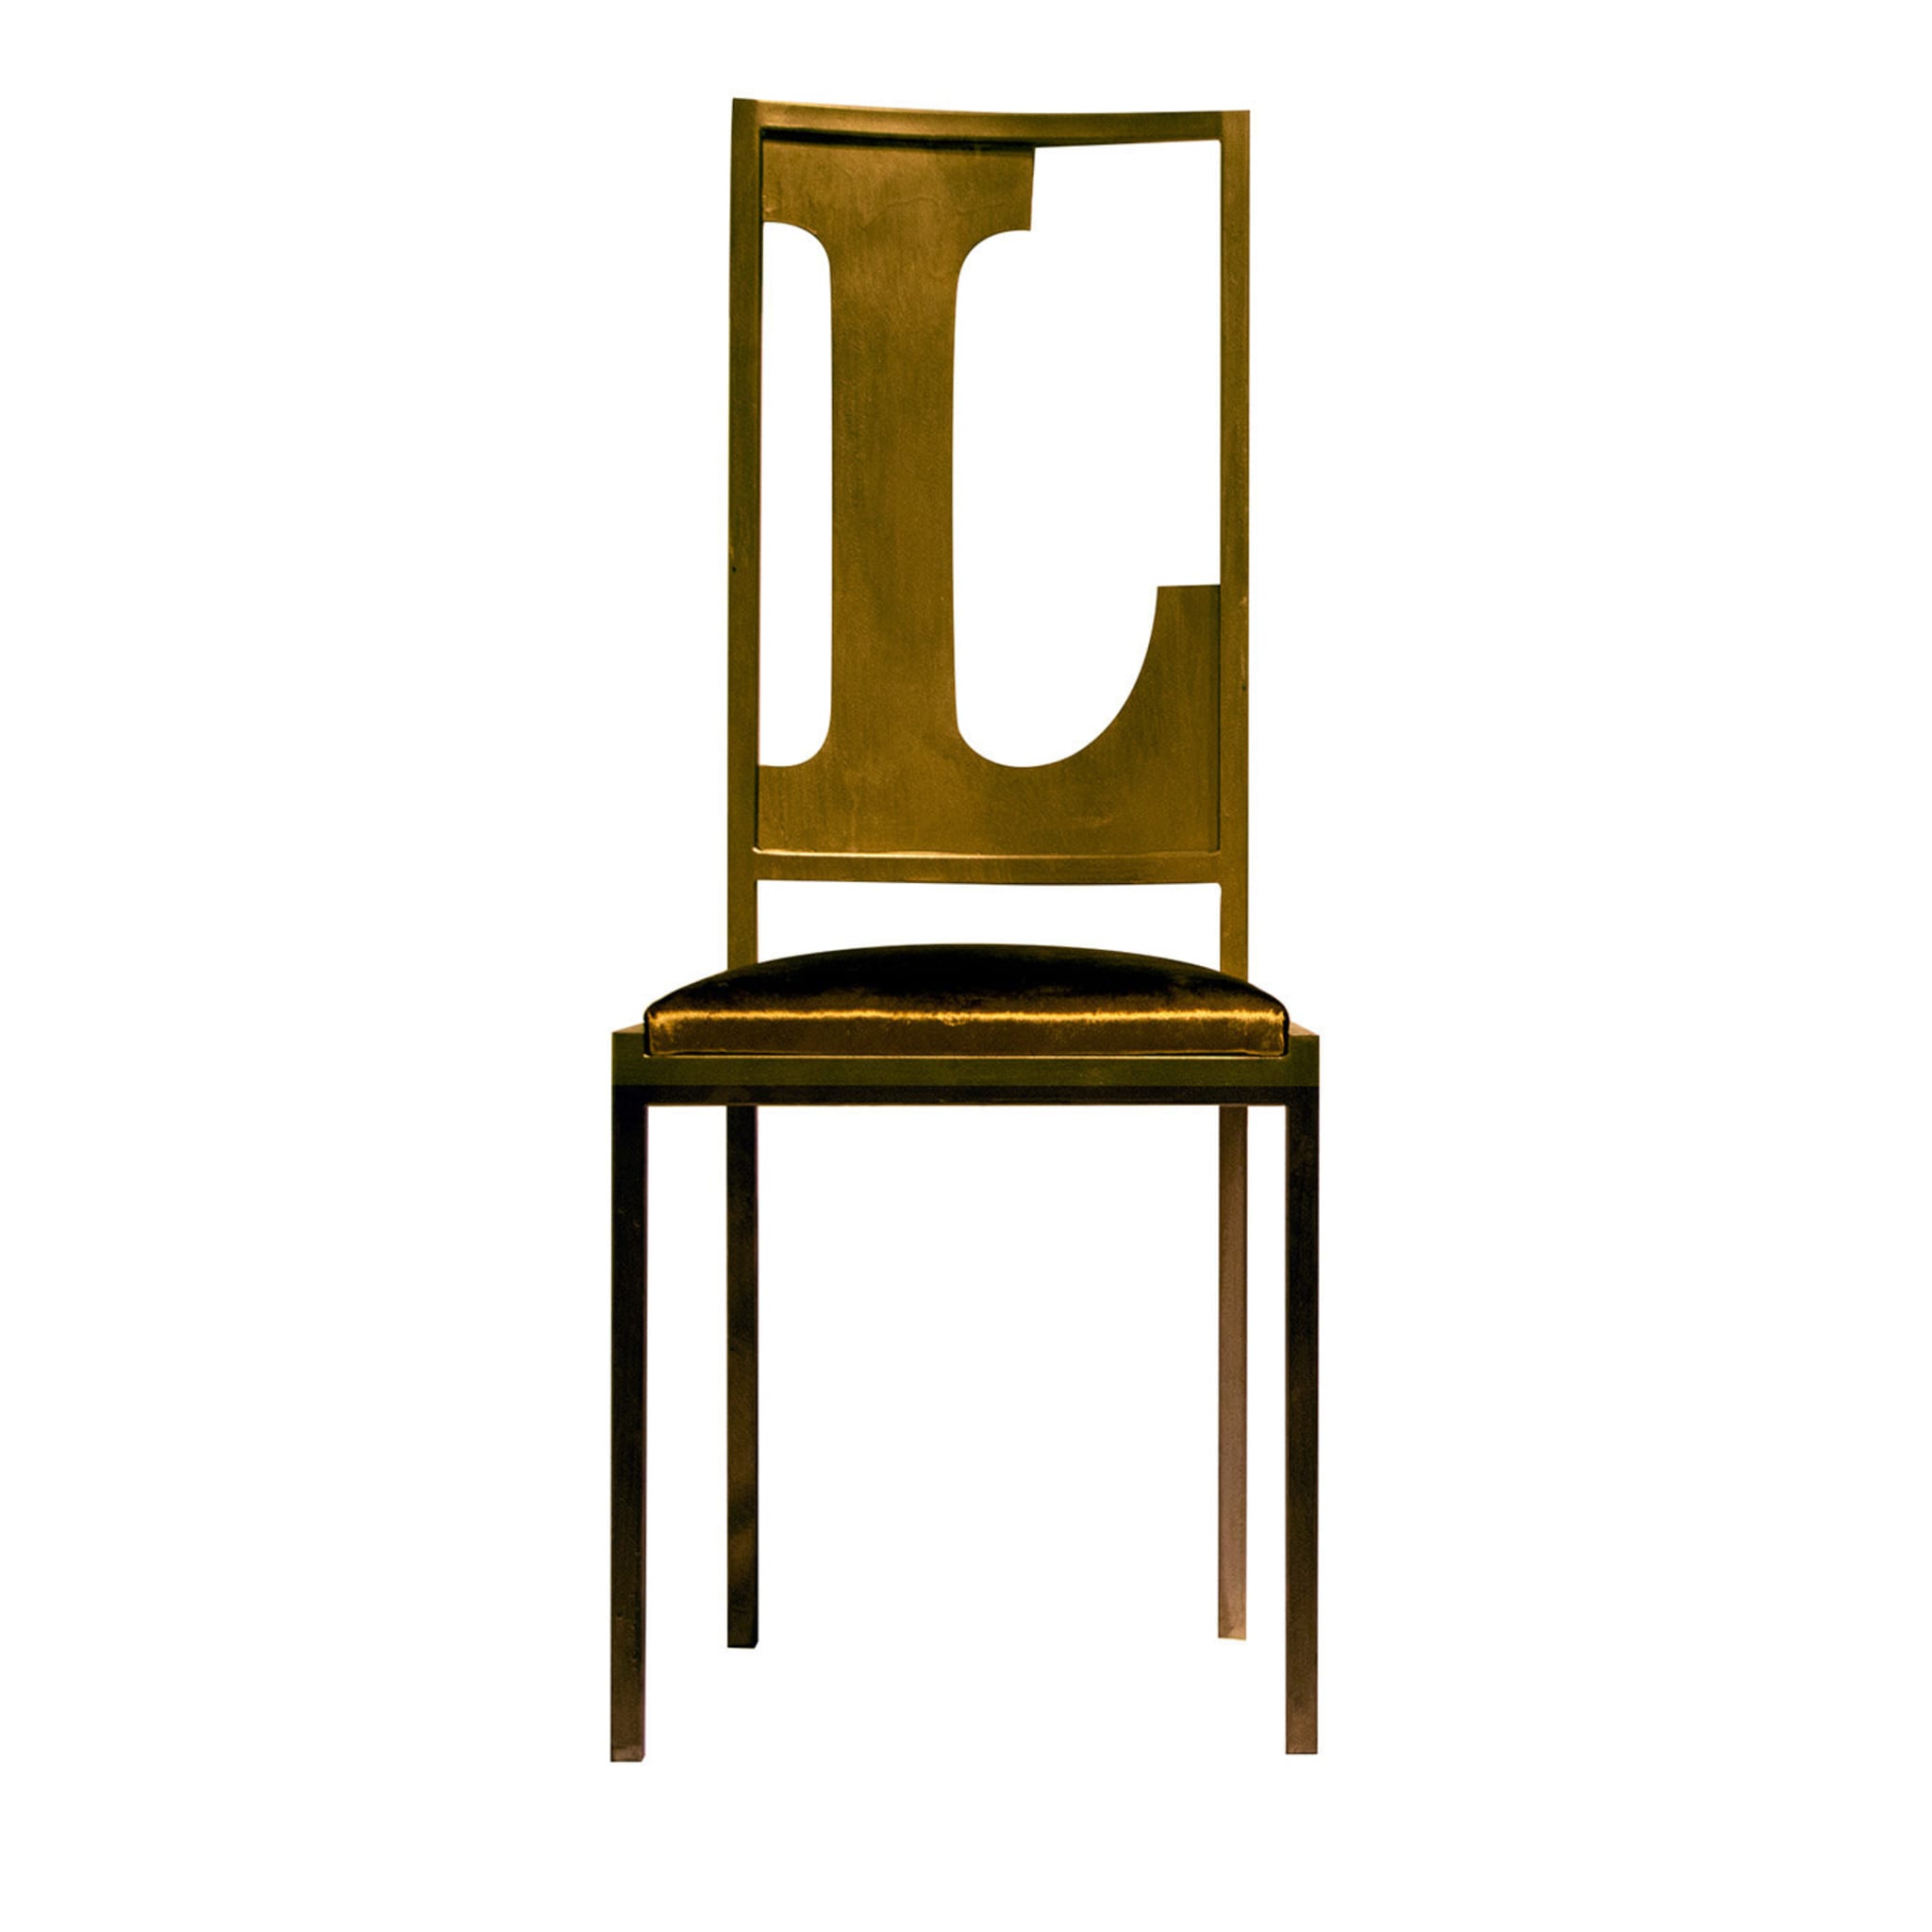 Gold Letter L Chair - Main view